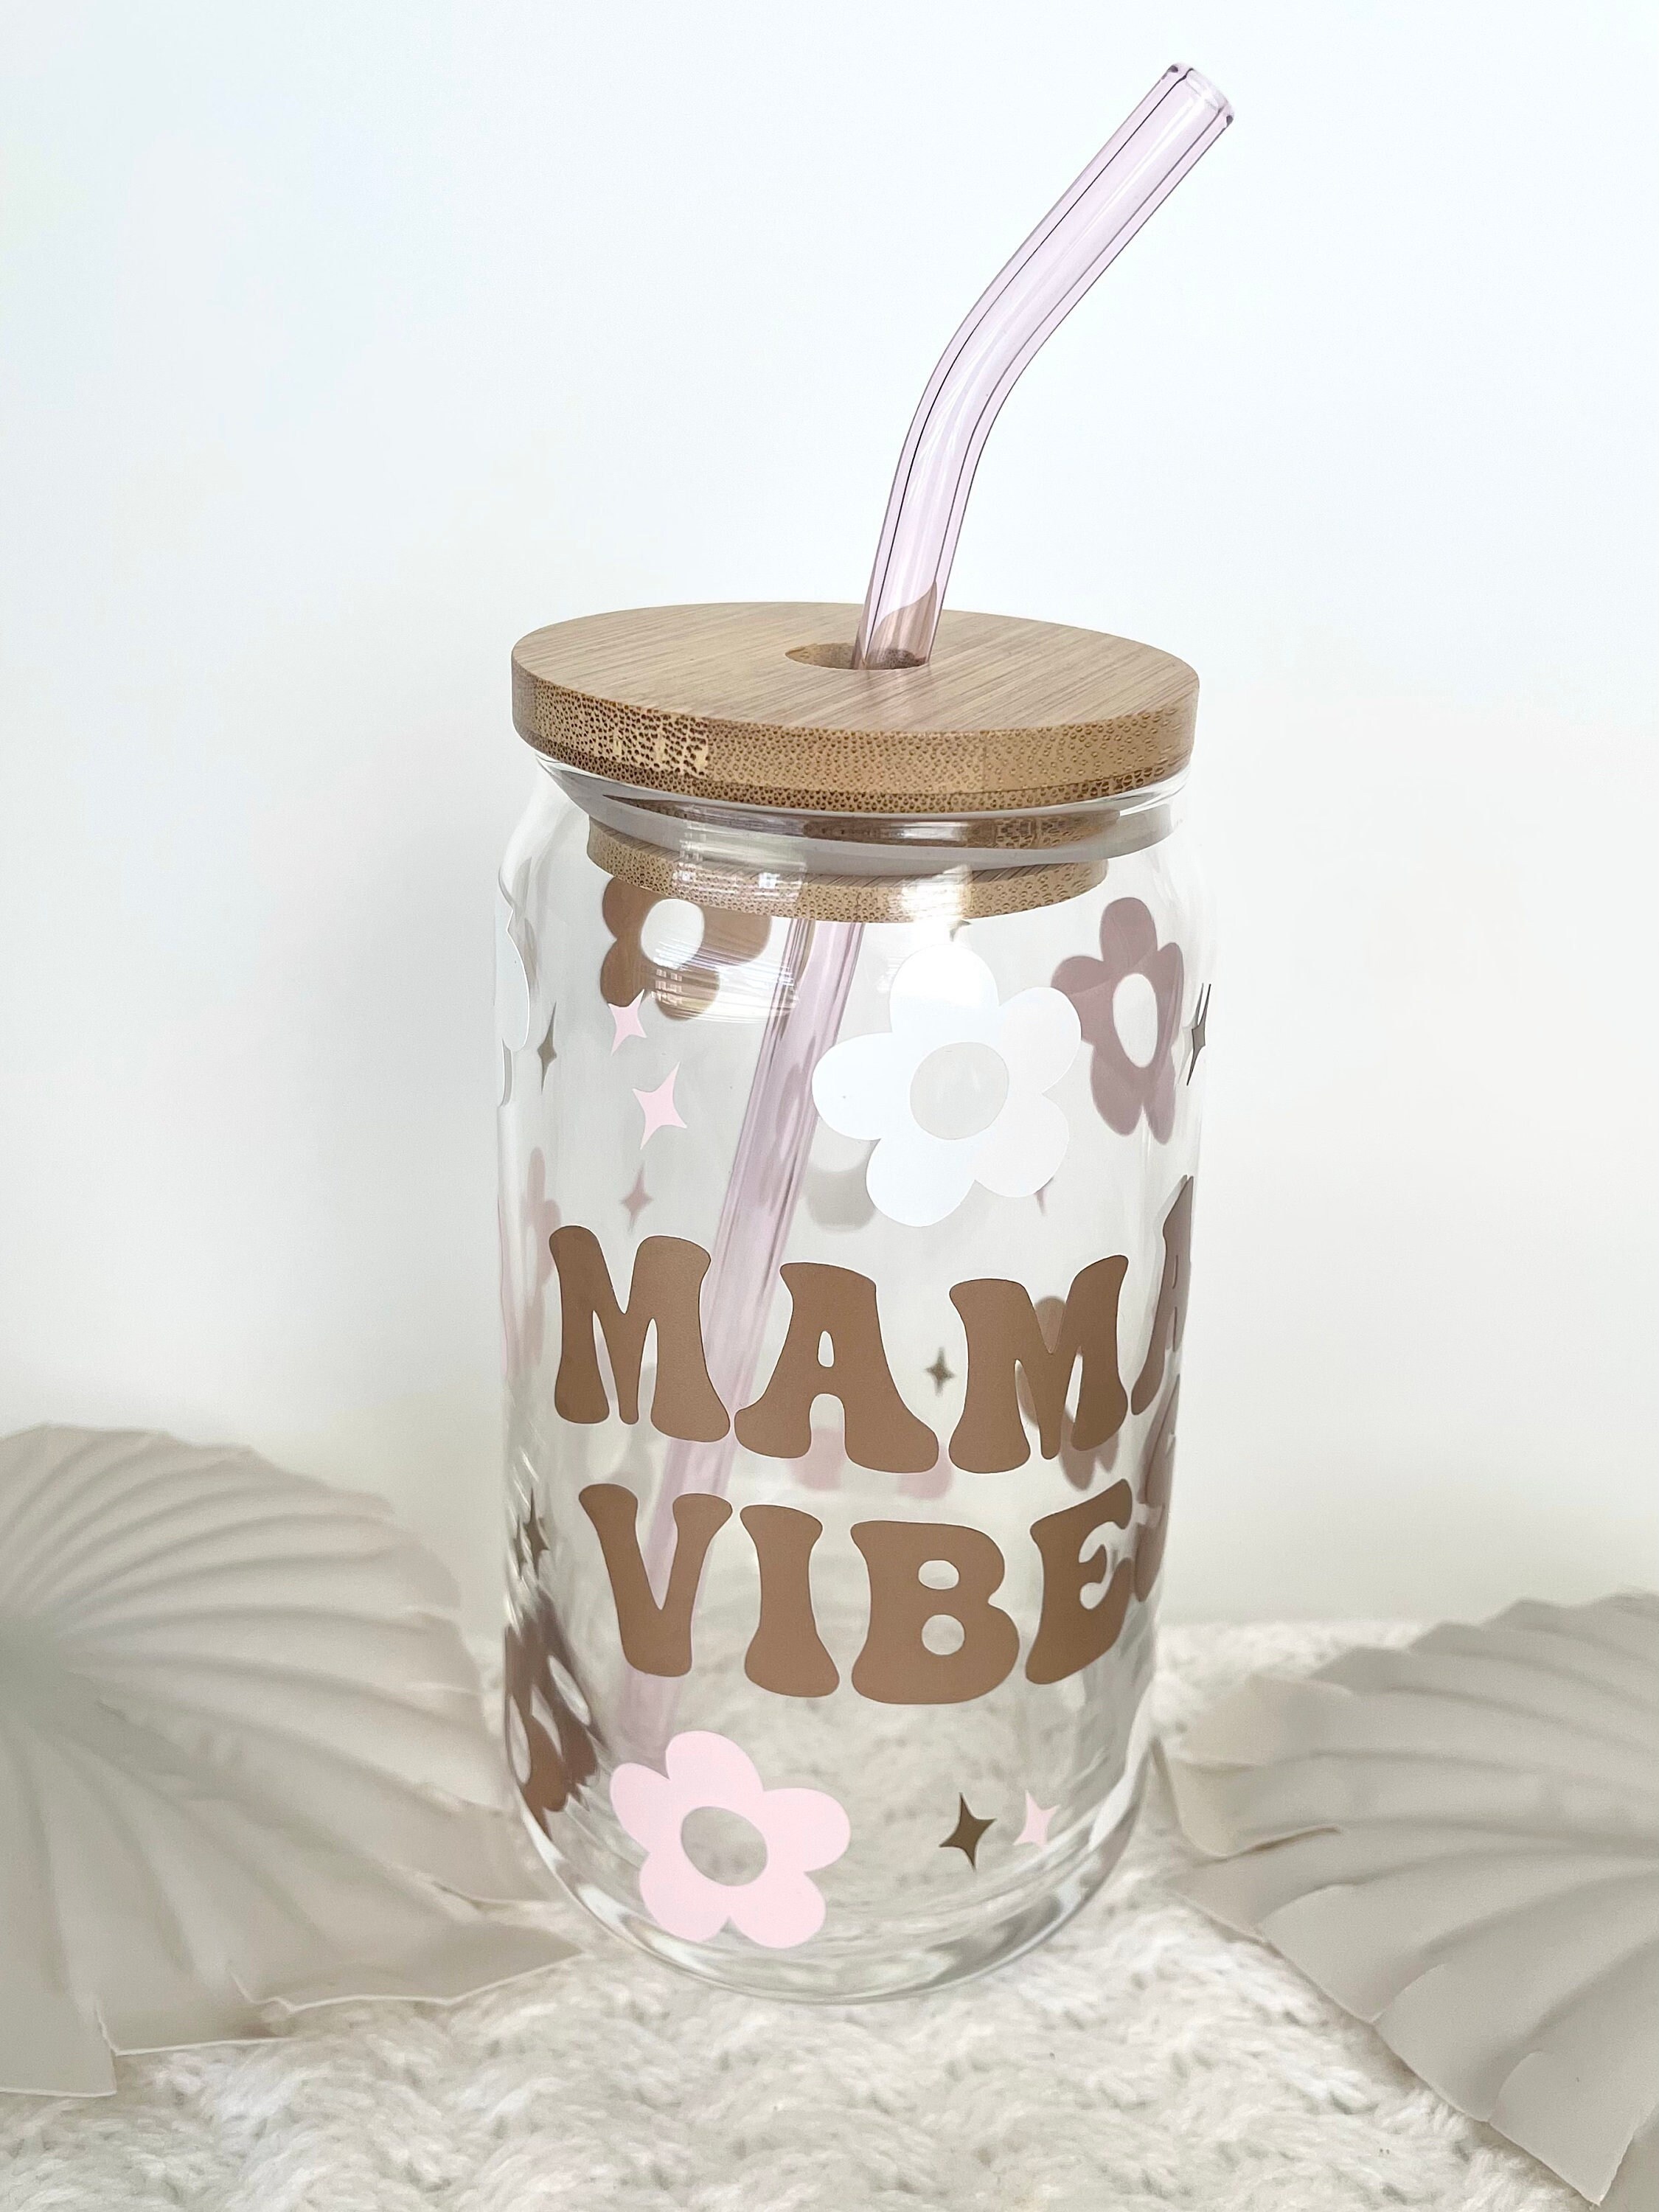 Summer Vibes 16 oz Beer glass with lid and straw